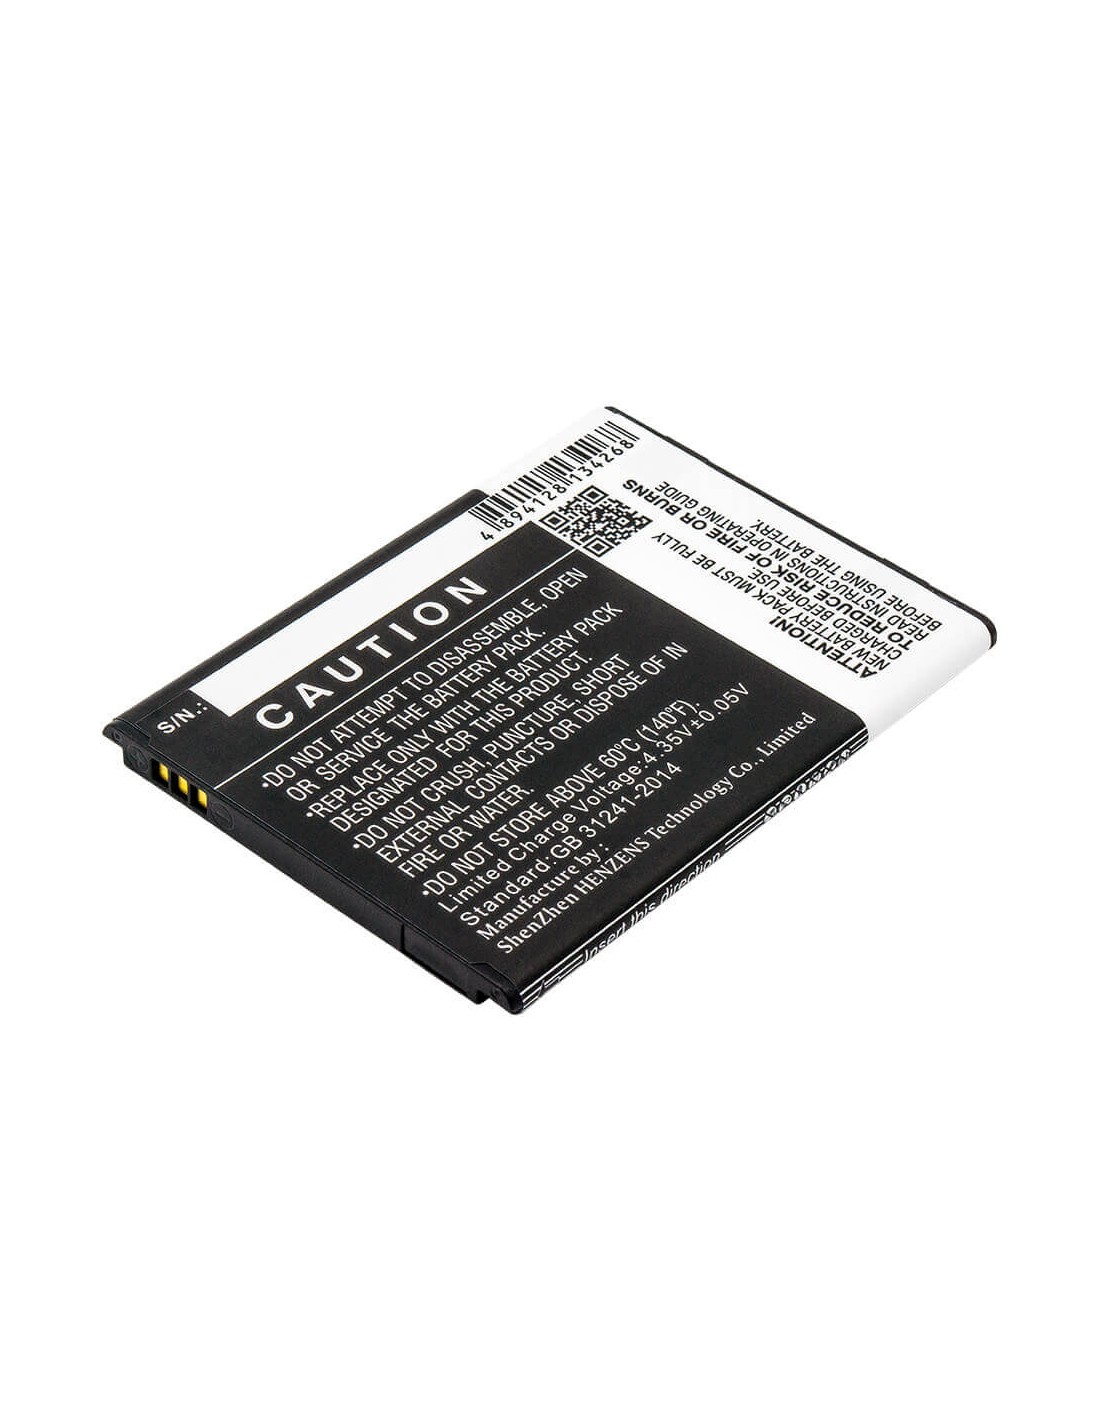 Battery for Samsung, Galaxy J1 Ace, Galaxy J1 Ace 3g Duos 3.8V, 1800mAh - 6.84Wh